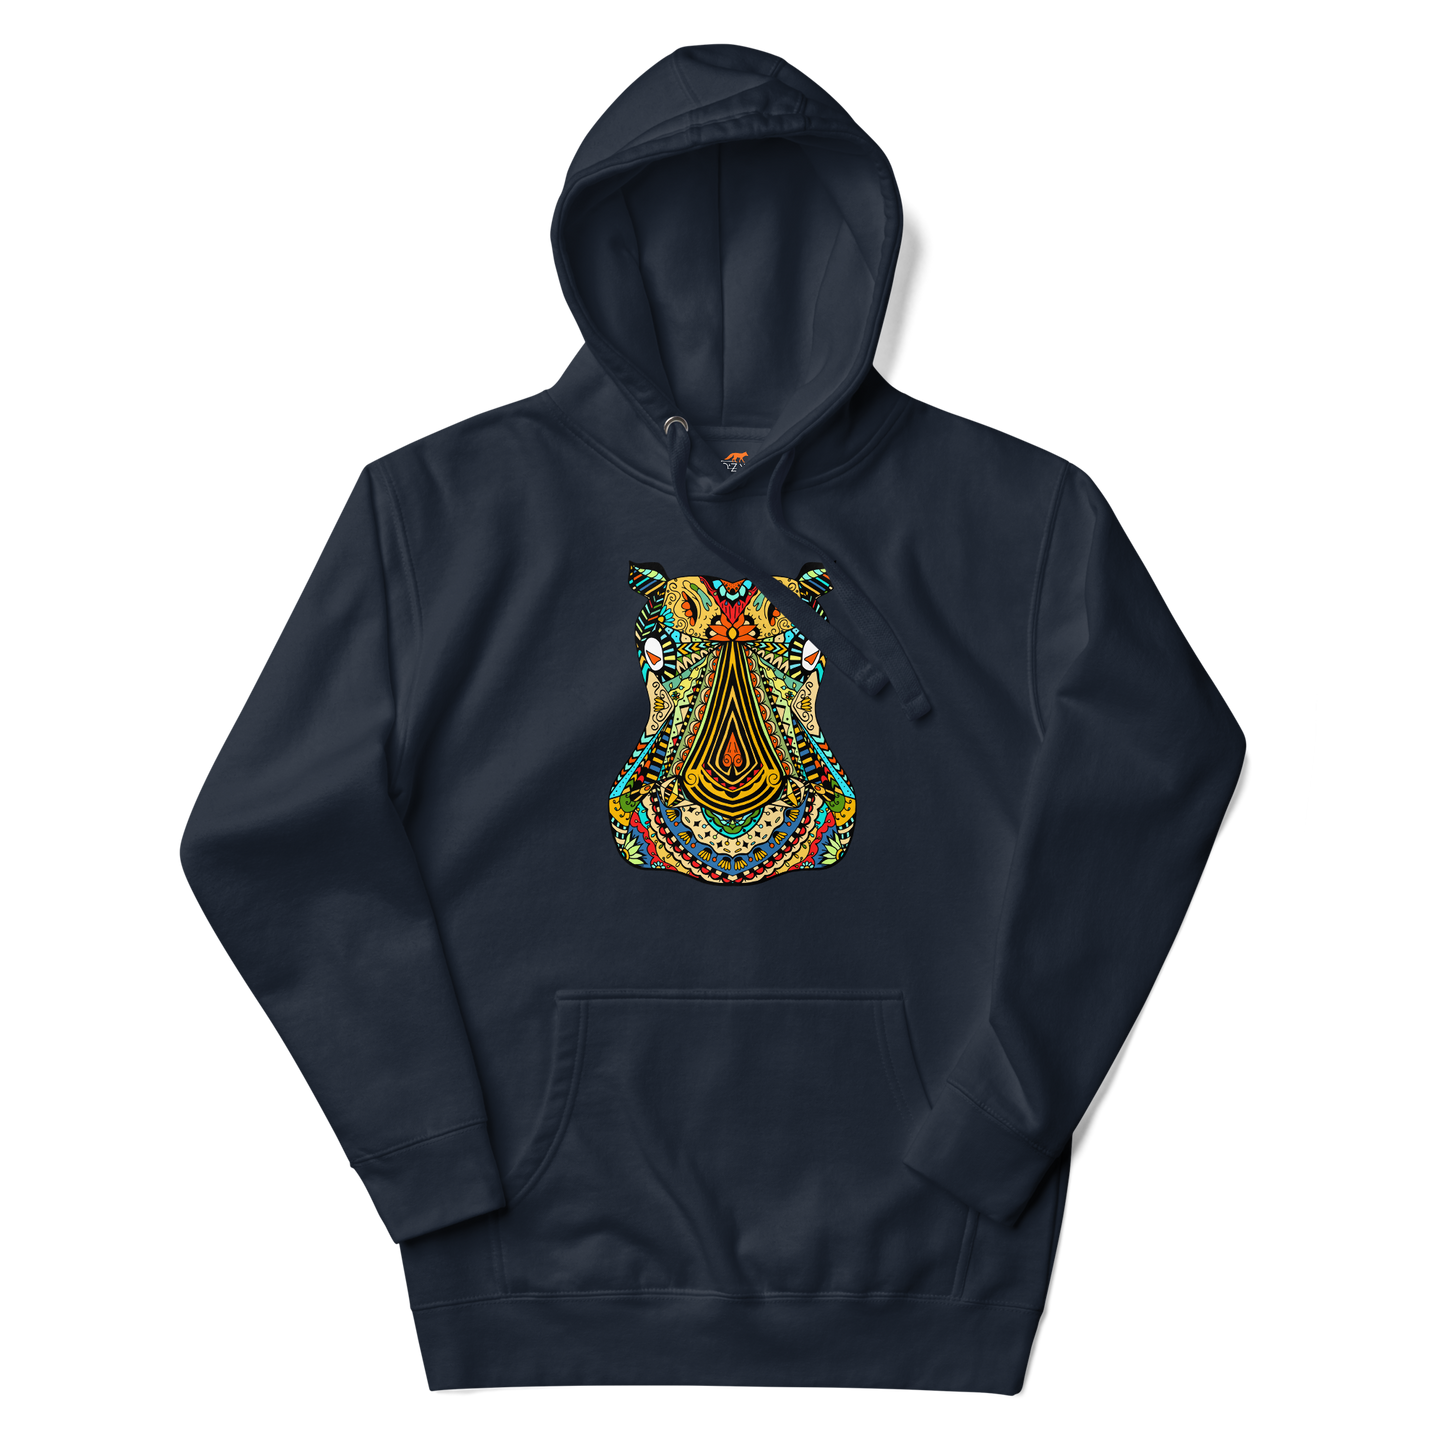 Navy Blazer Premium Hippo Hoodie featuring a vibrant Zentangle Hippo graphic on the chest - Cool Graphic Hippo Hoodies - Boozy Fox